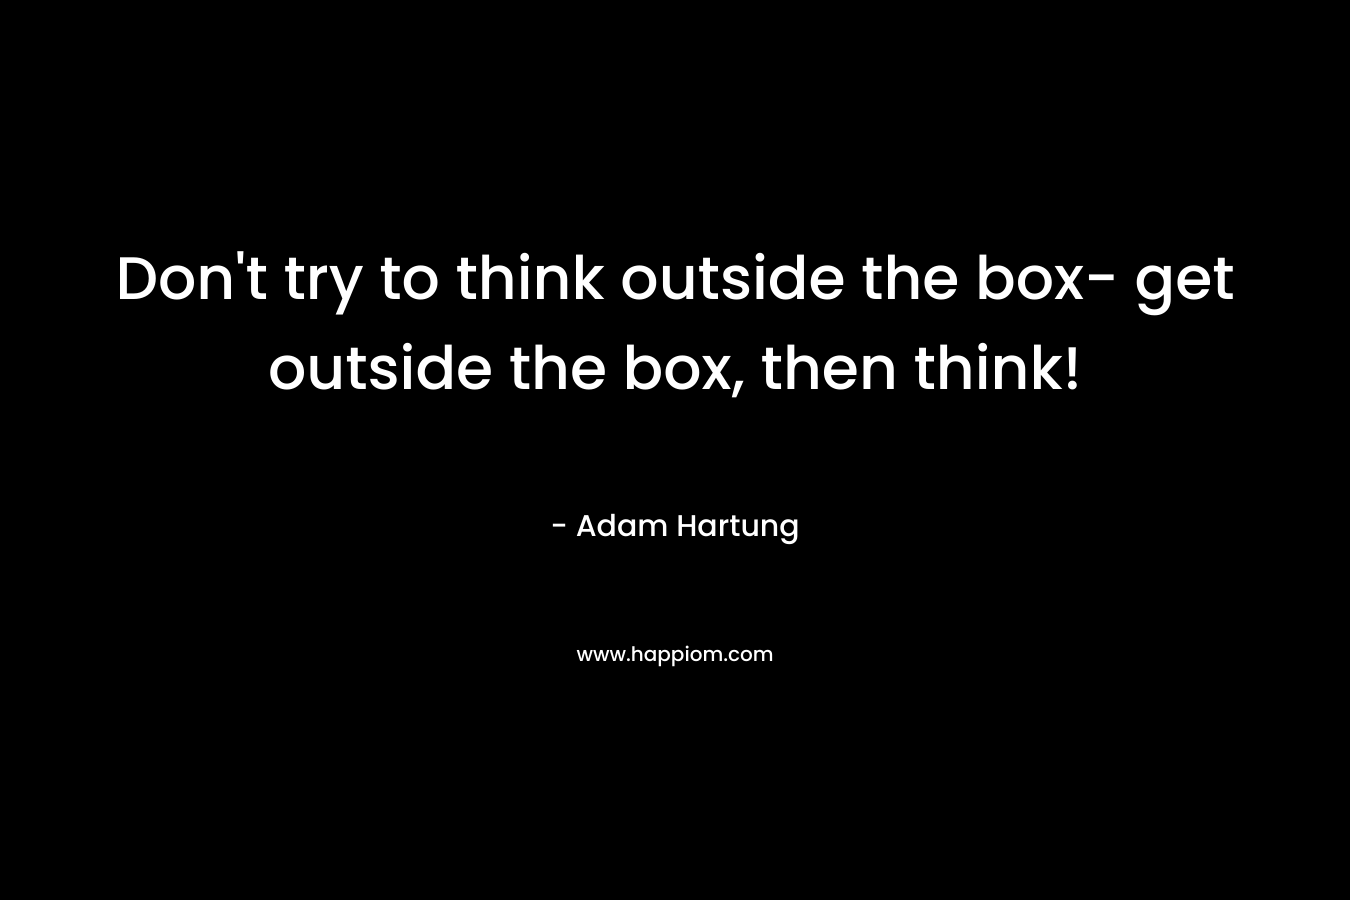 Don't try to think outside the box- get outside the box, then think!